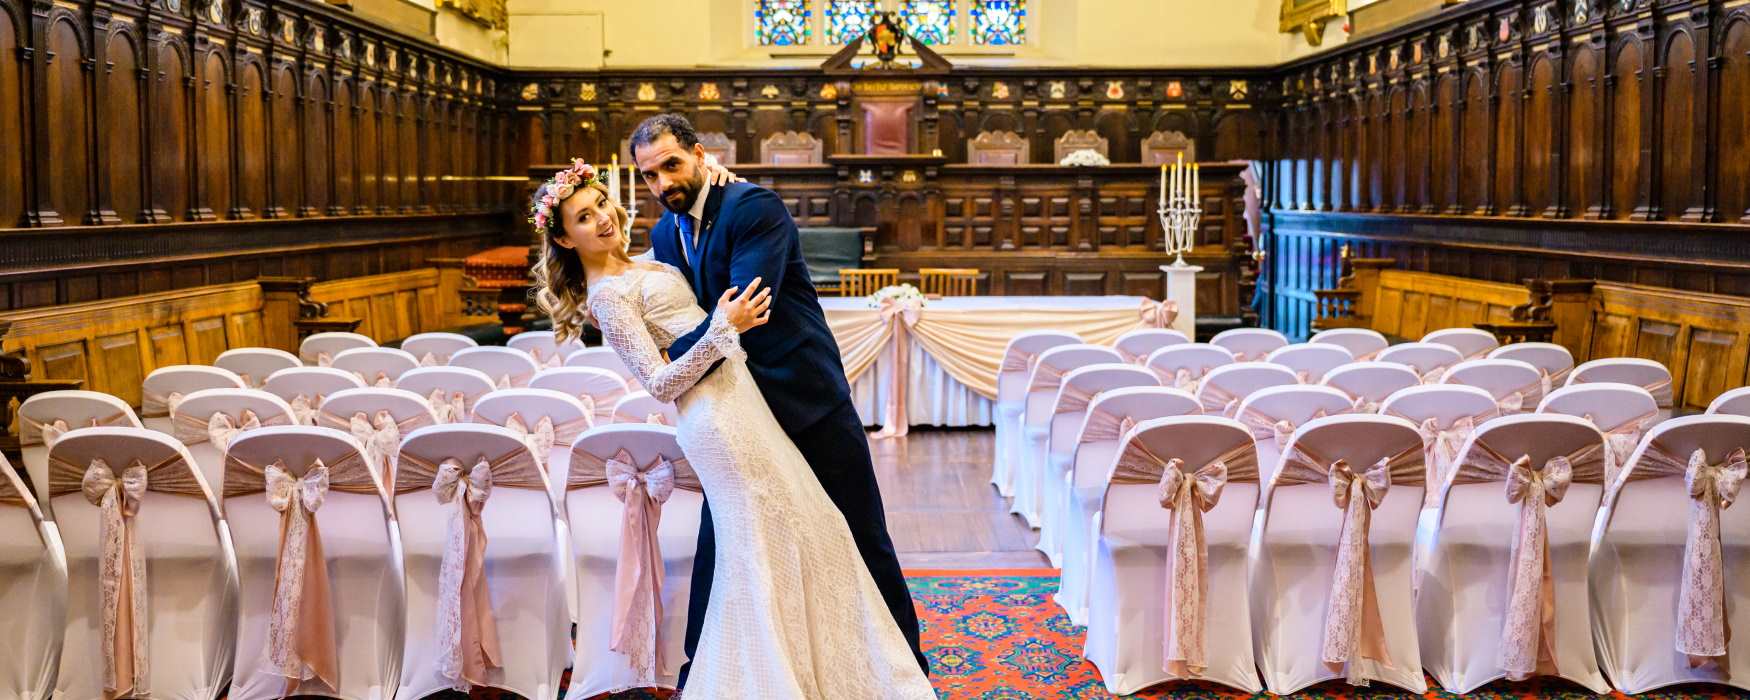 Weddings at Exeter Guildhall